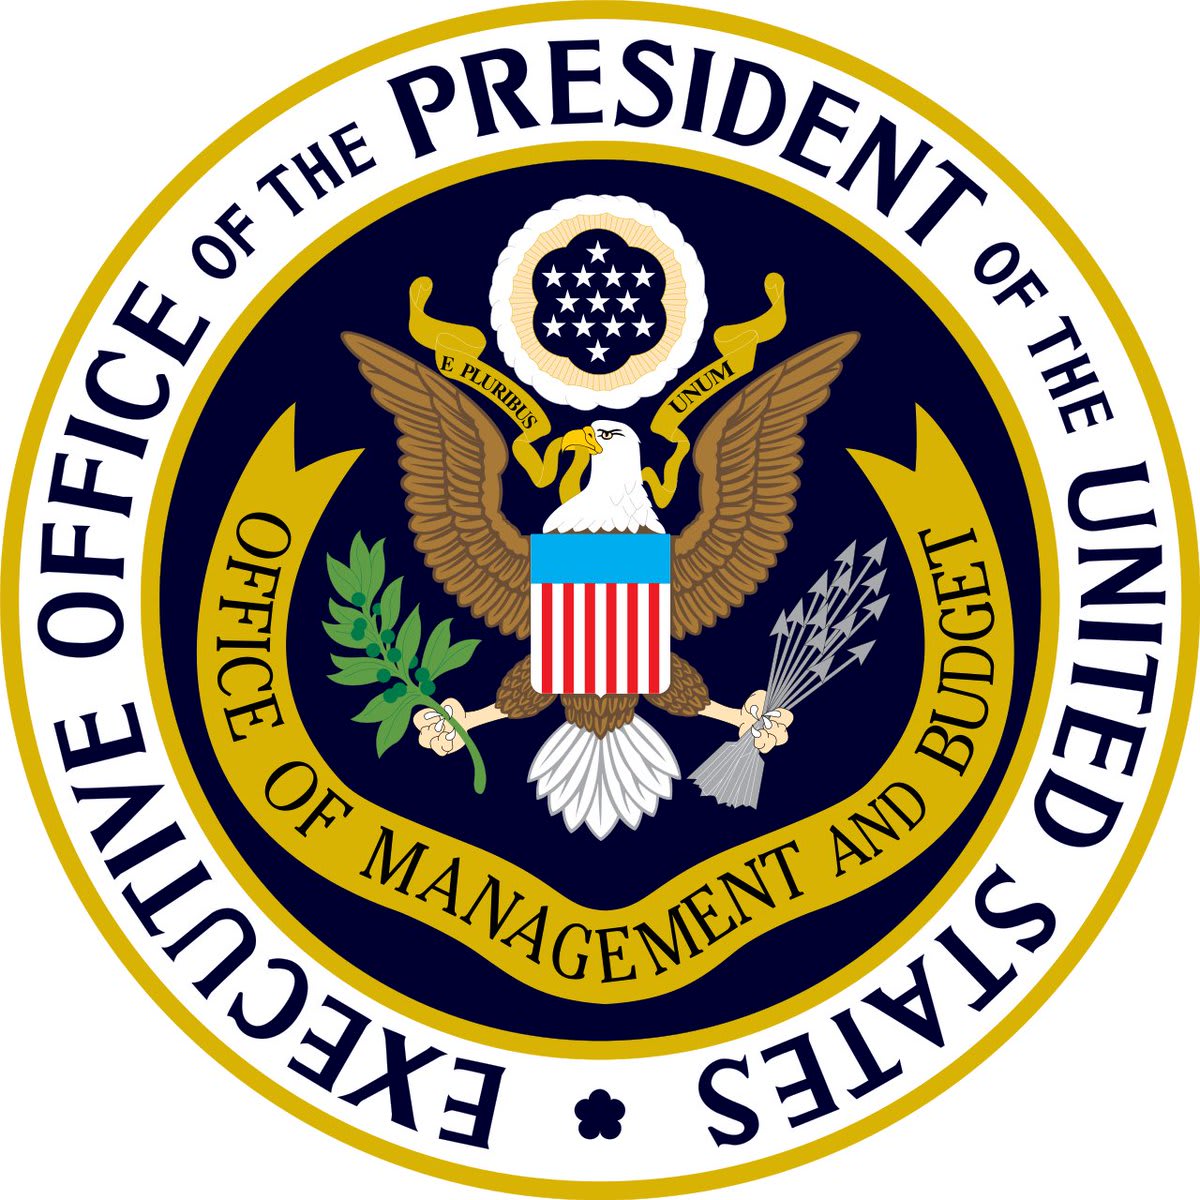 President Harding creates a new government bureau, the Office of Management and Budget (OMB)